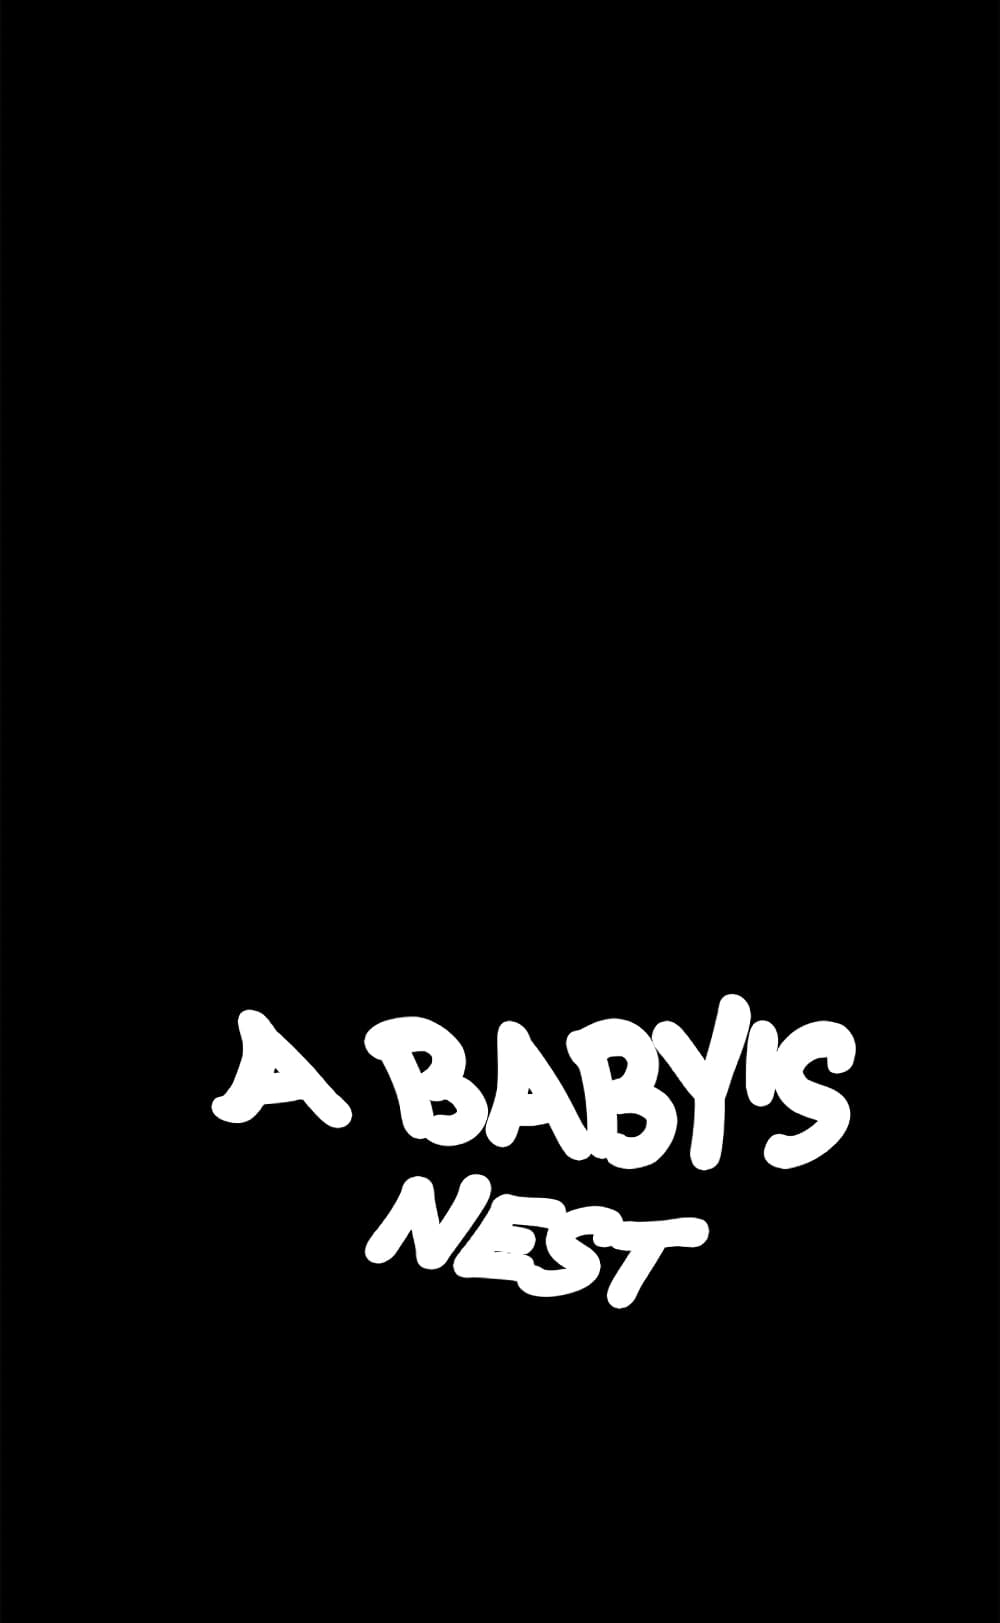 A Baby’s Nest5 (6)